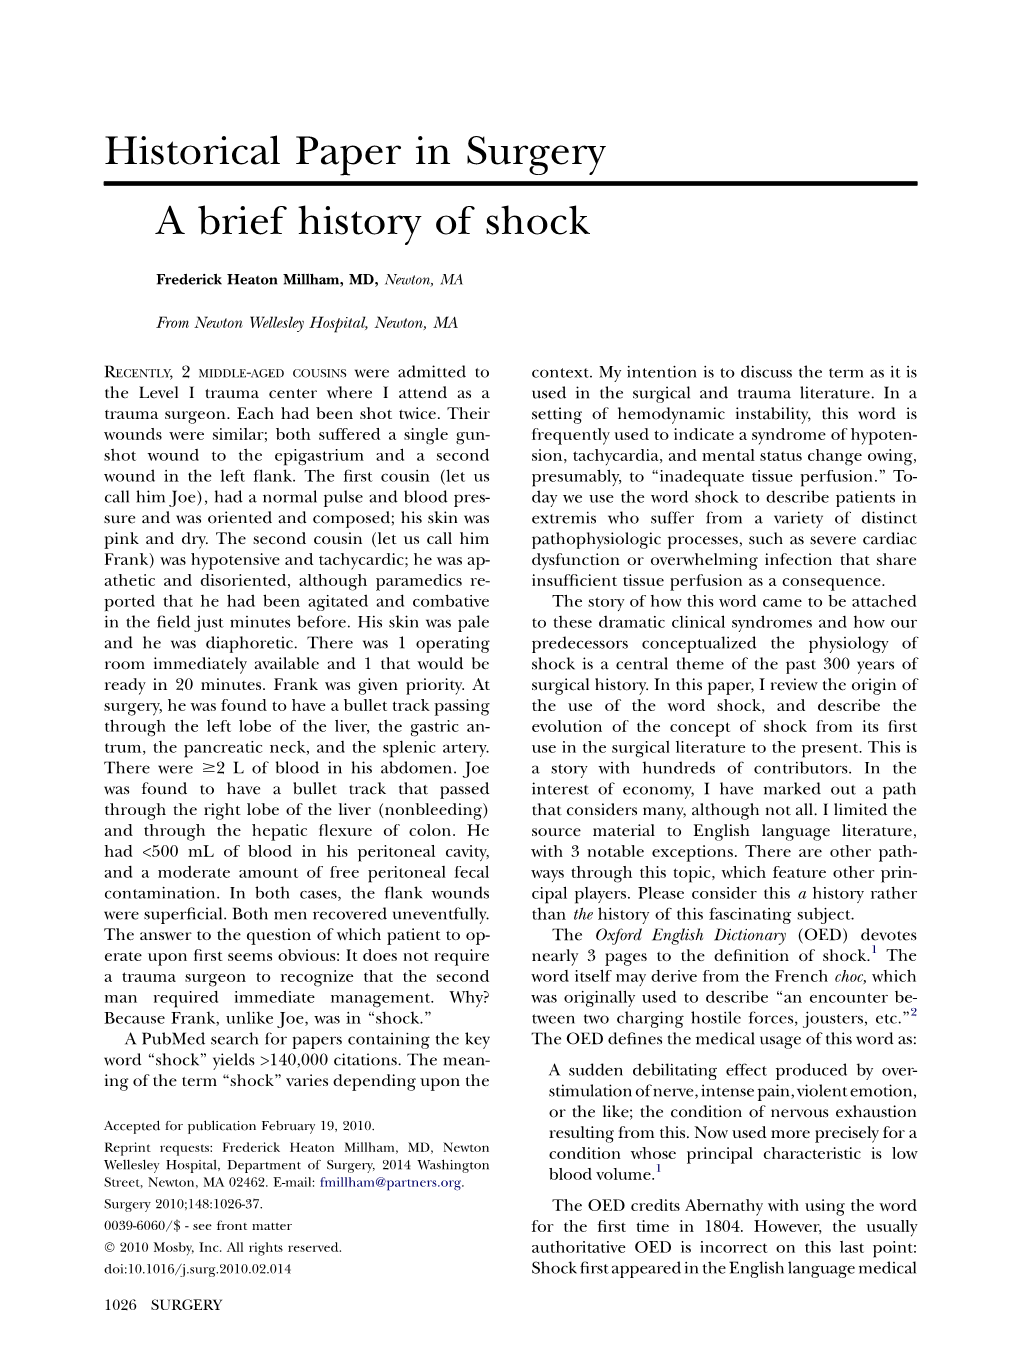 Historical Paper in Surgery a Brief History of Shock